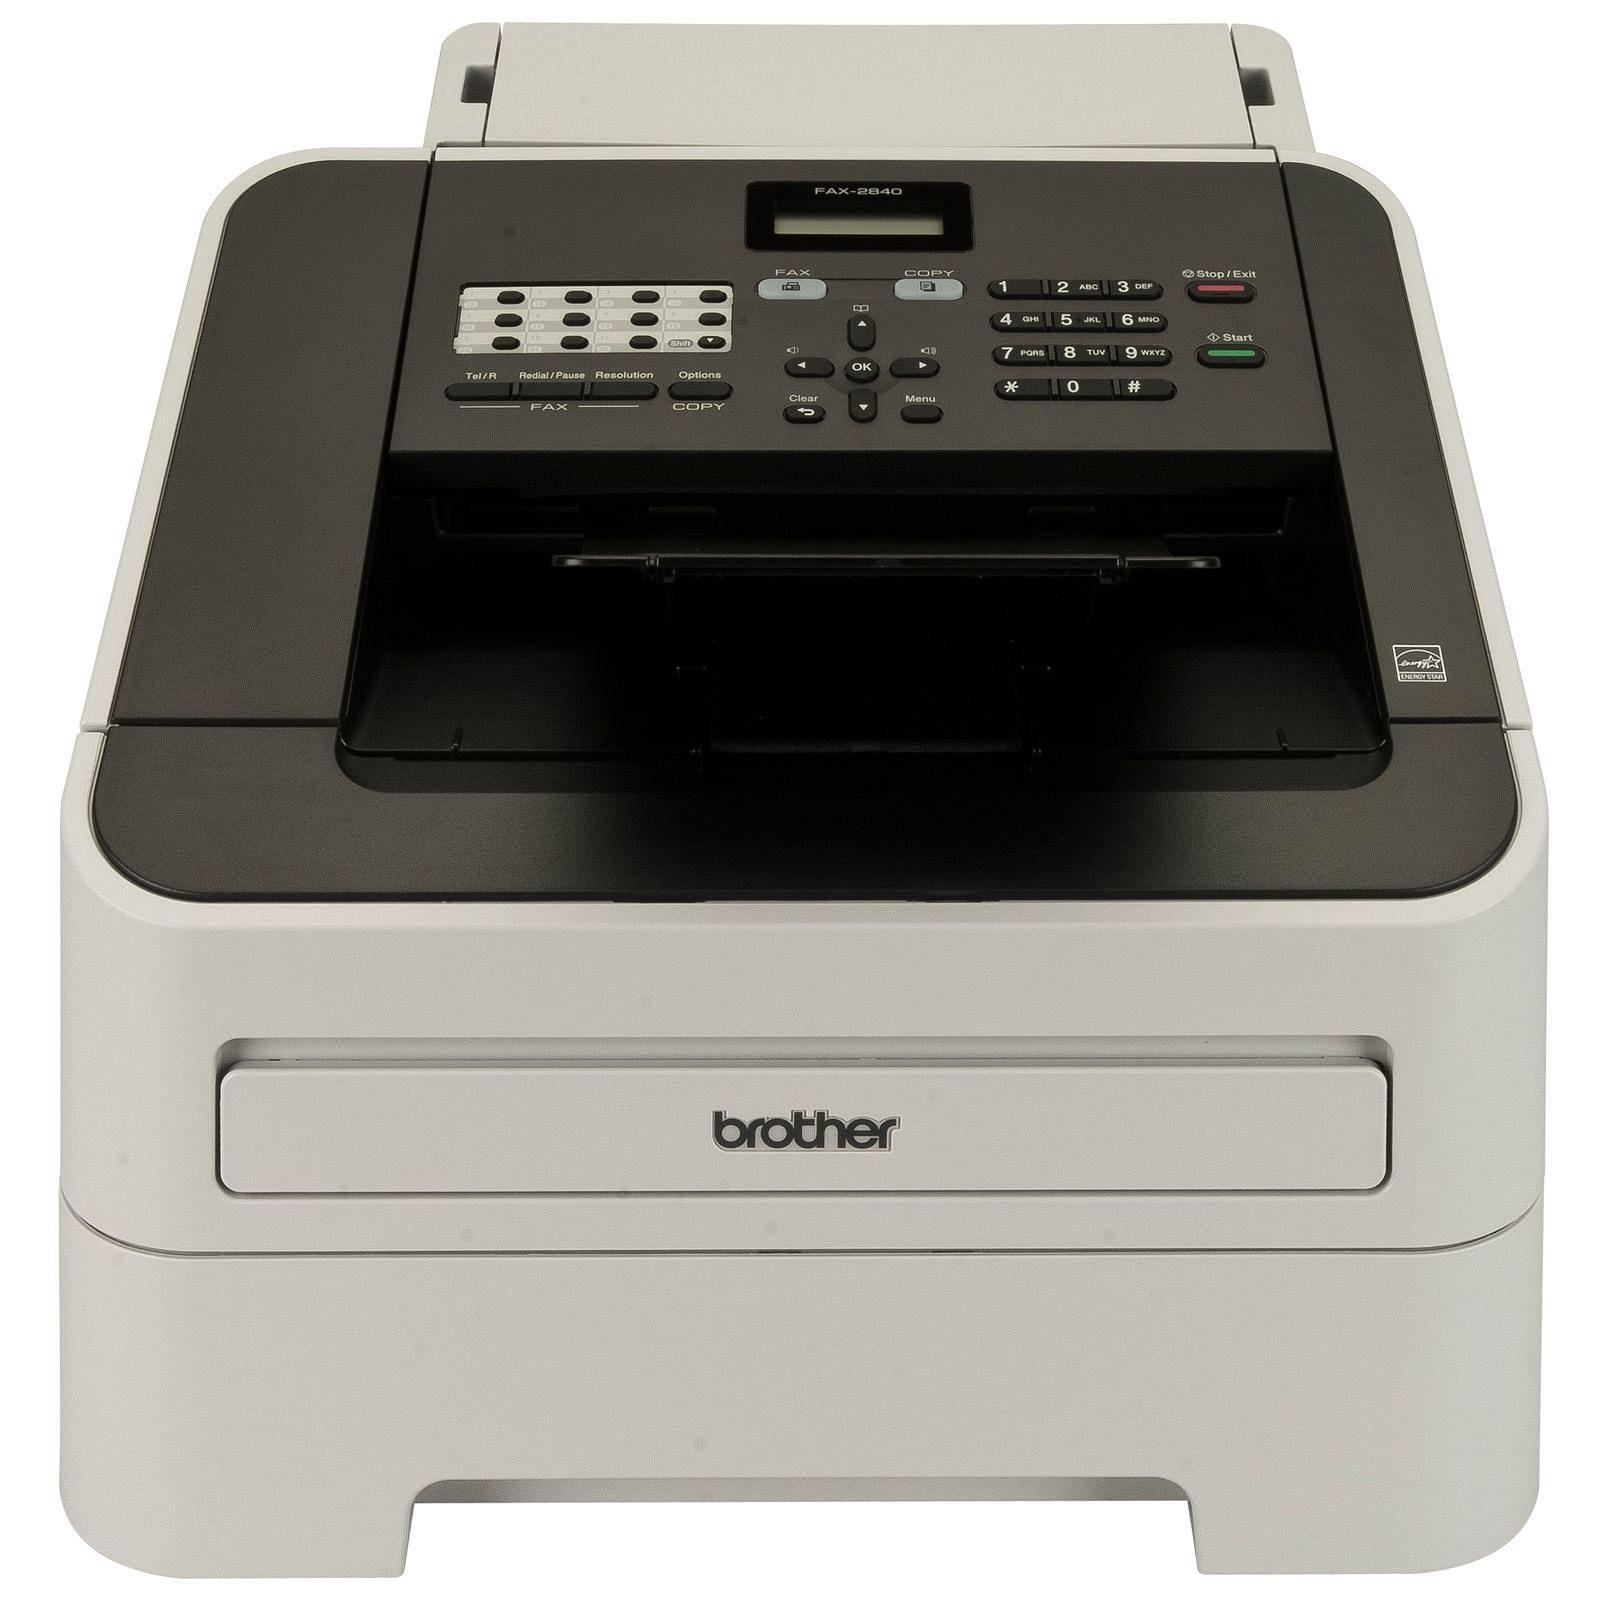 Brother FAX-2840 Monochrome Laser Fax Machine With PC Connectivity